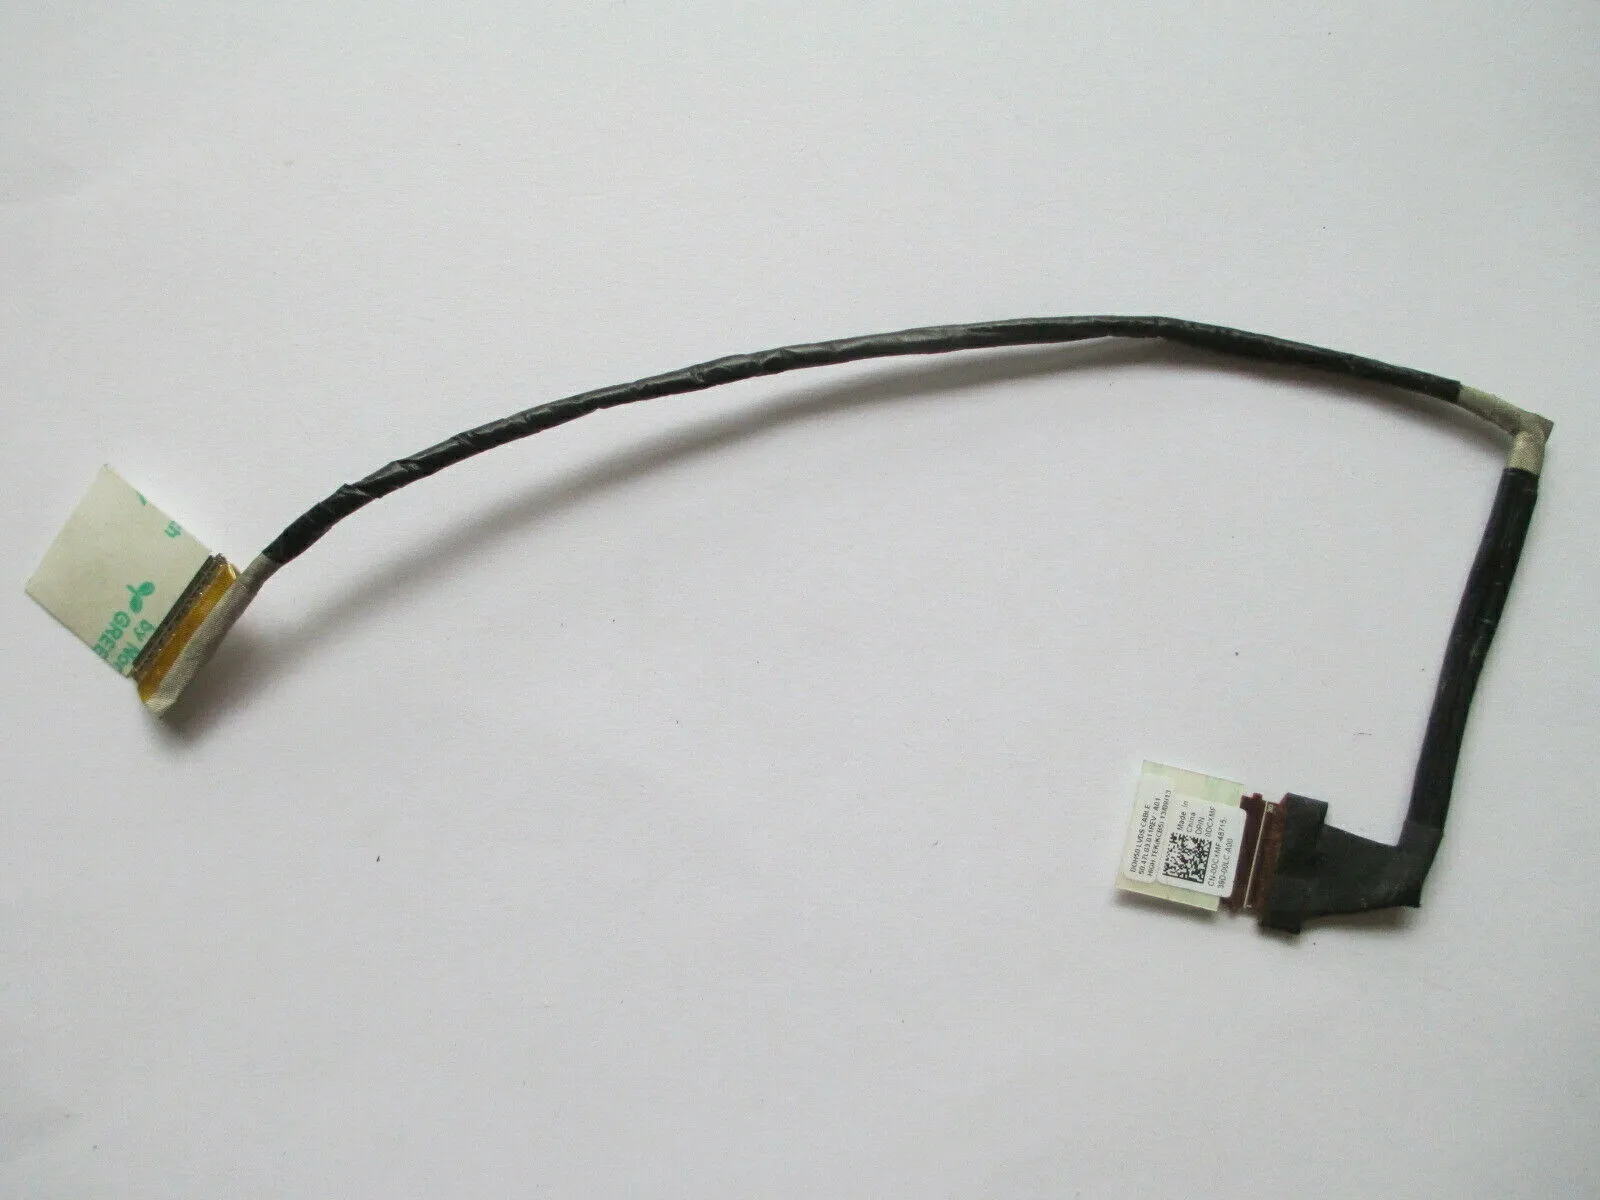 LCD LED Video Flex Cable For Dell Inspiron 7537 Laptop Screen Display Cable 50.47L03.001